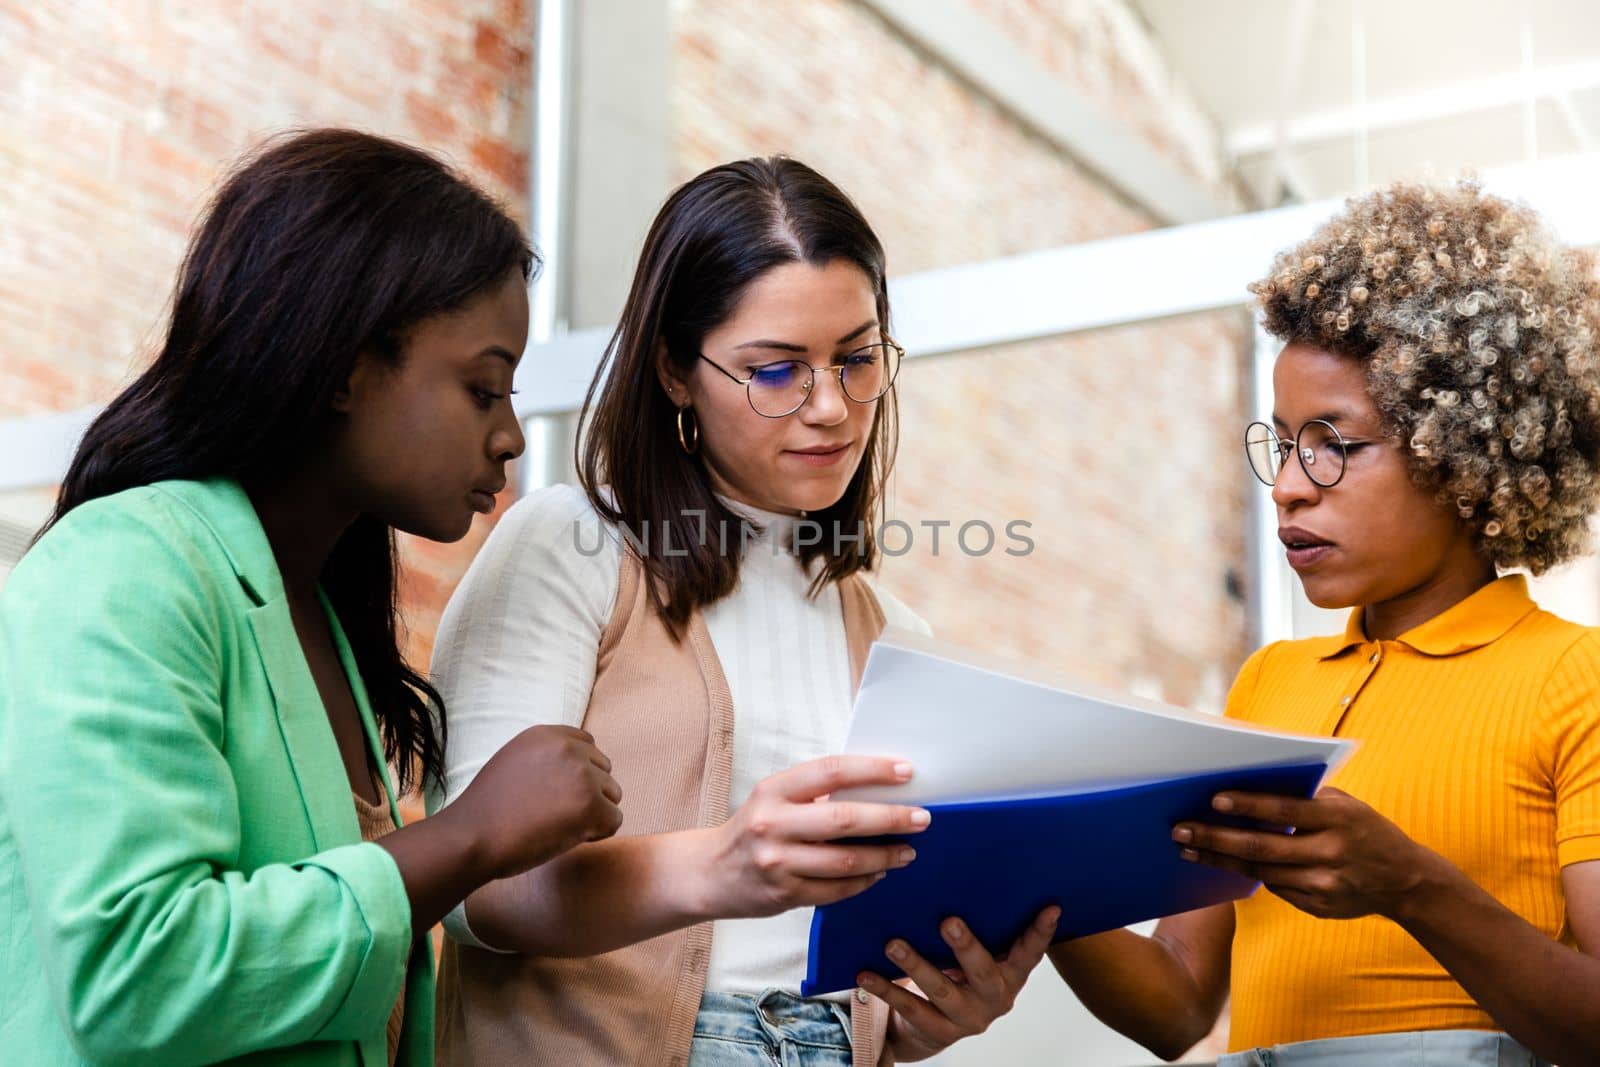 Group of multiracial women look over some work documents in the office. Start up concept. Women at work concept.